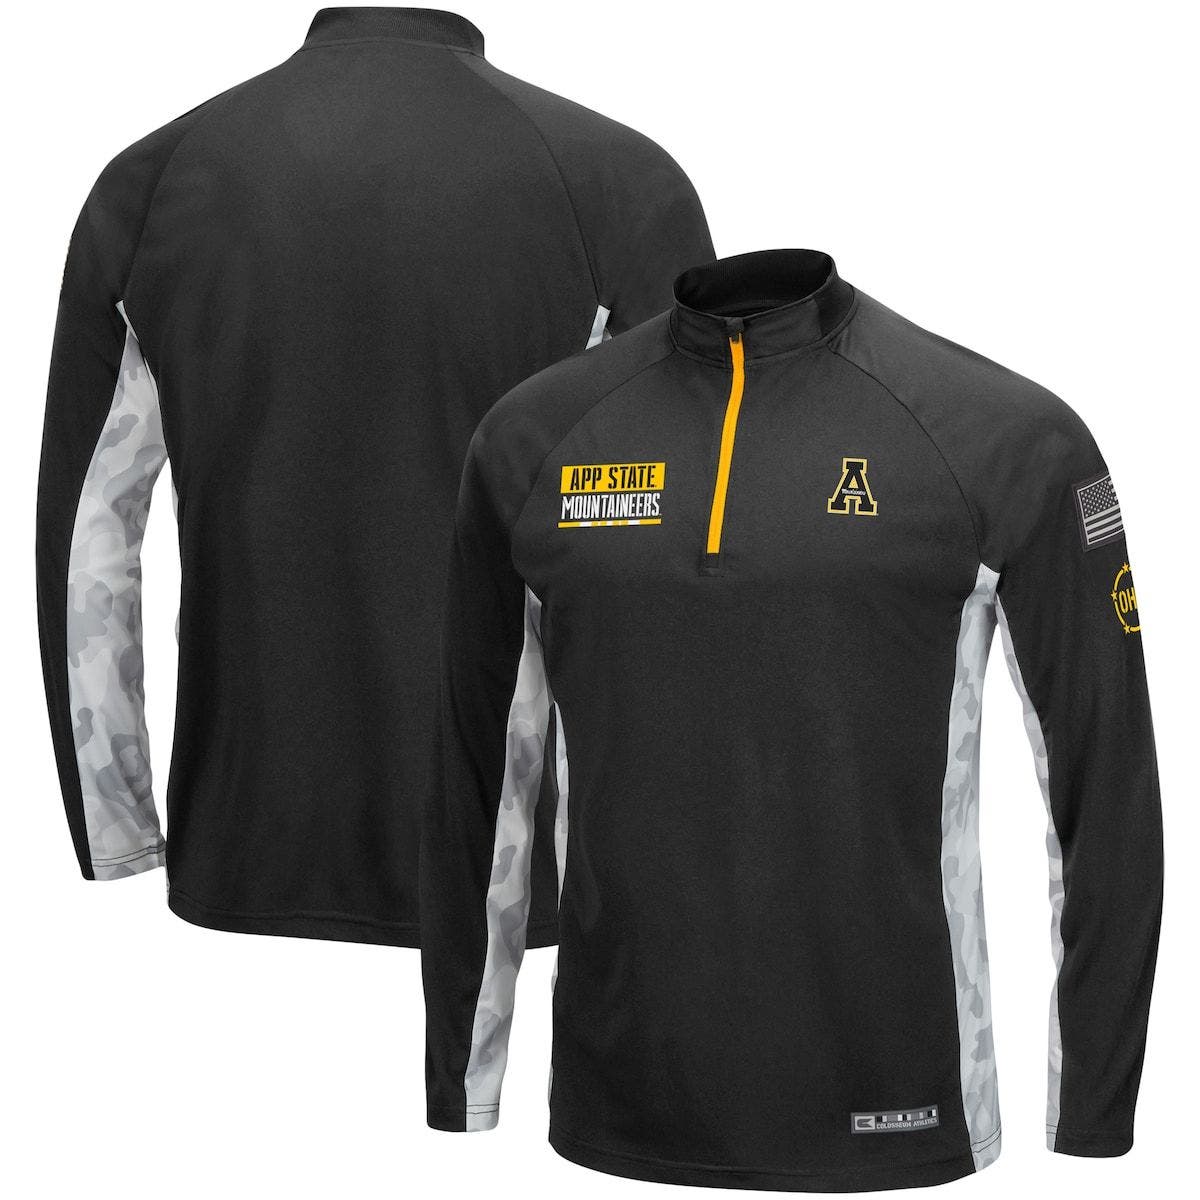 COLOSSEUM Men's Colosseum Black Appalachian State Mountaineers OHT Military Appreciation Snow Cruise Raglan 1/4-Zip Jacket at Nordstrom